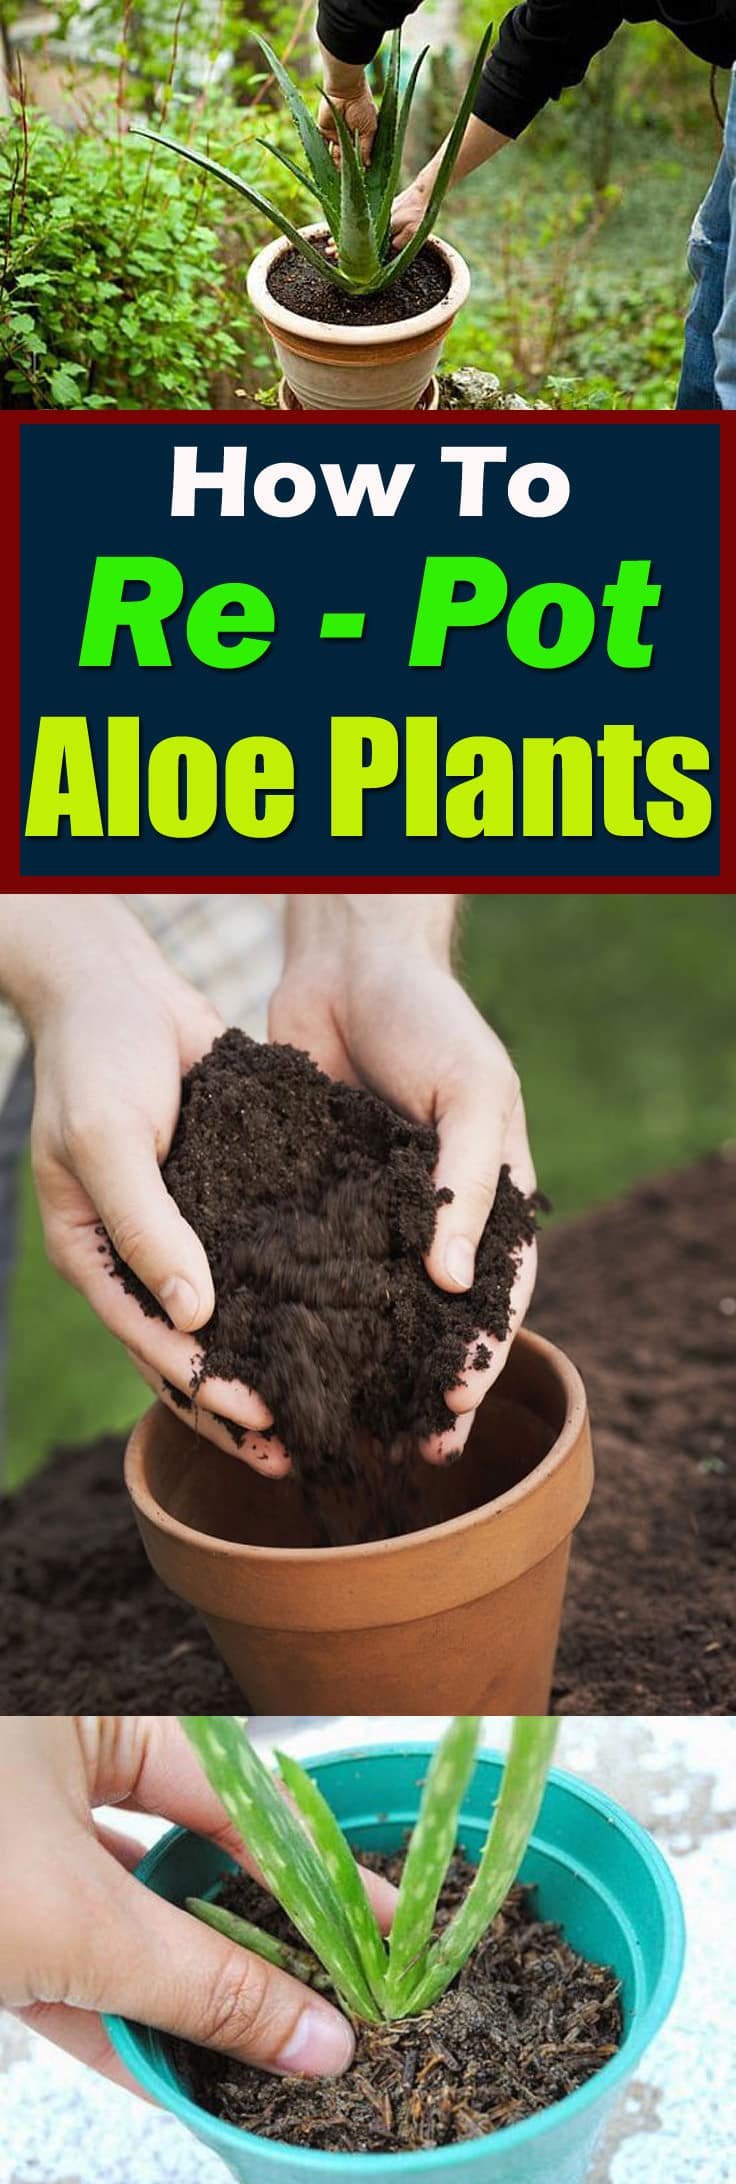 If you've got clump-forming succulent plants, this informative guide on "How to Re-pot Aloe Plants" will help you in dividing, propagating, and repotting them!